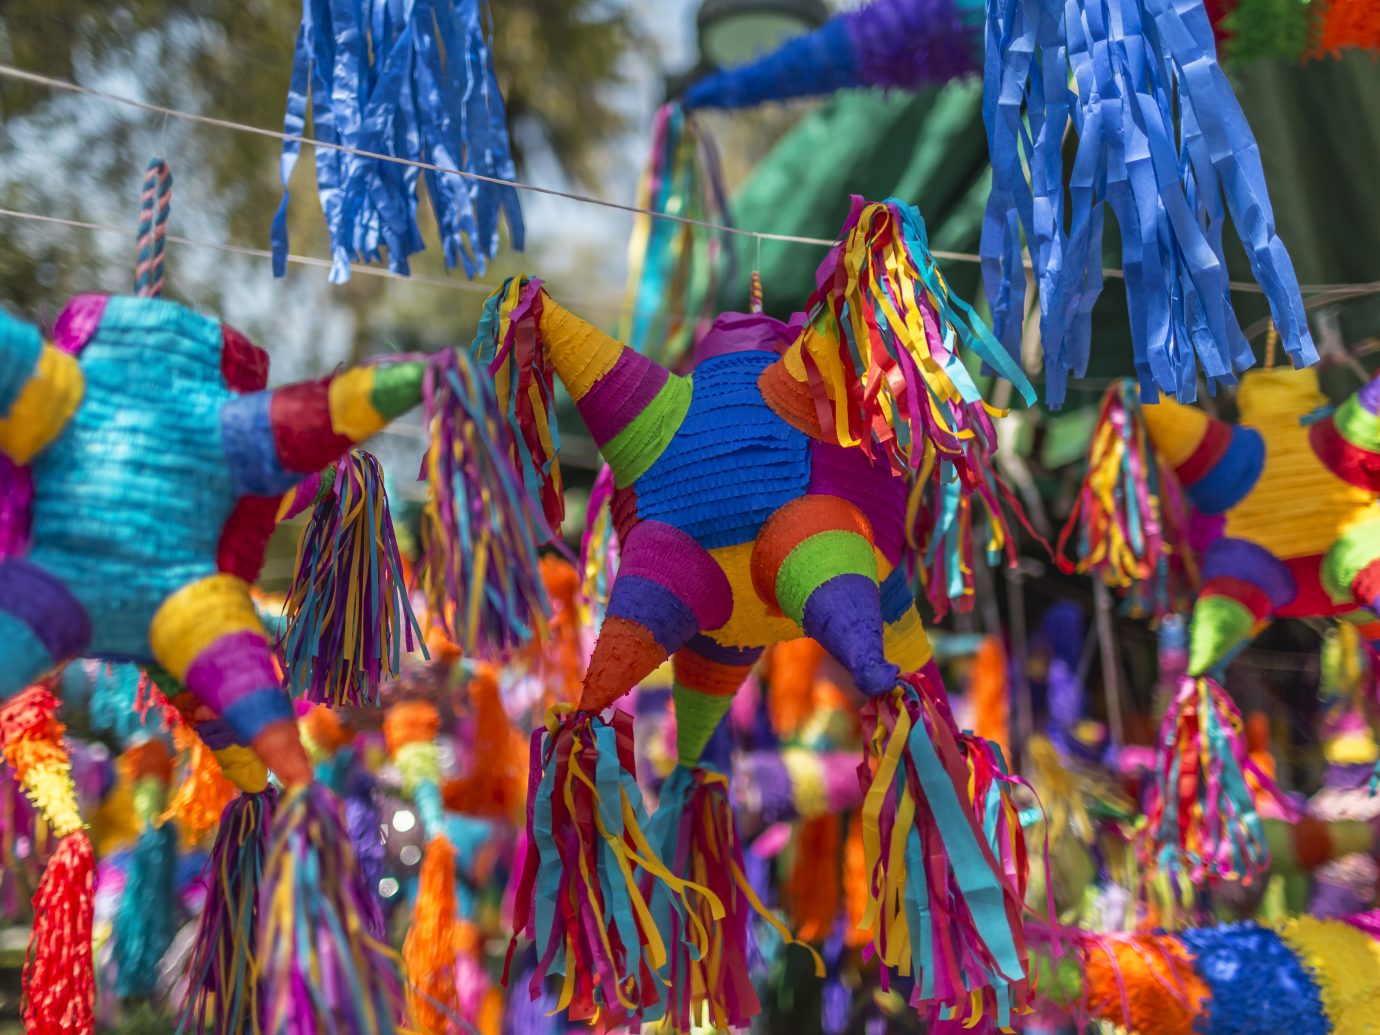 Colorful image from Mexican pinatas. This craft is very popular and can be purchased at any stand throughout Mexico.